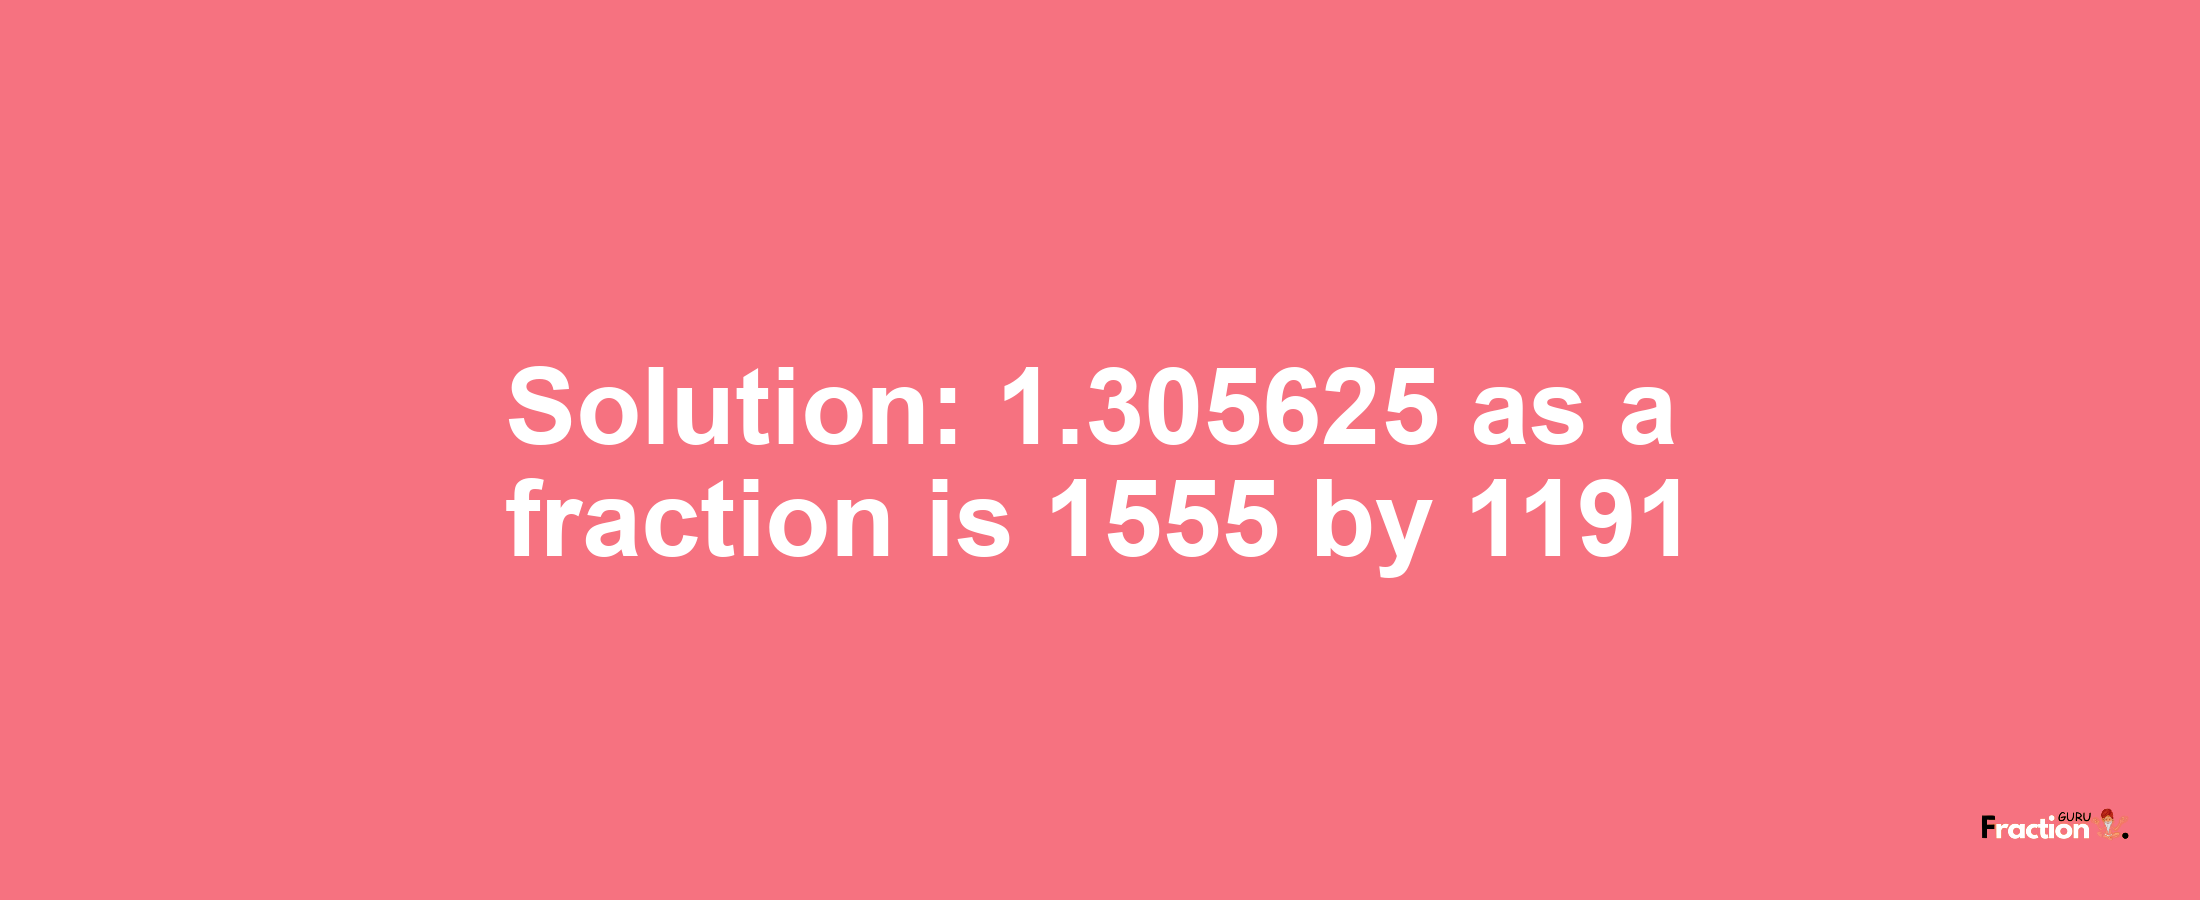 Solution:1.305625 as a fraction is 1555/1191